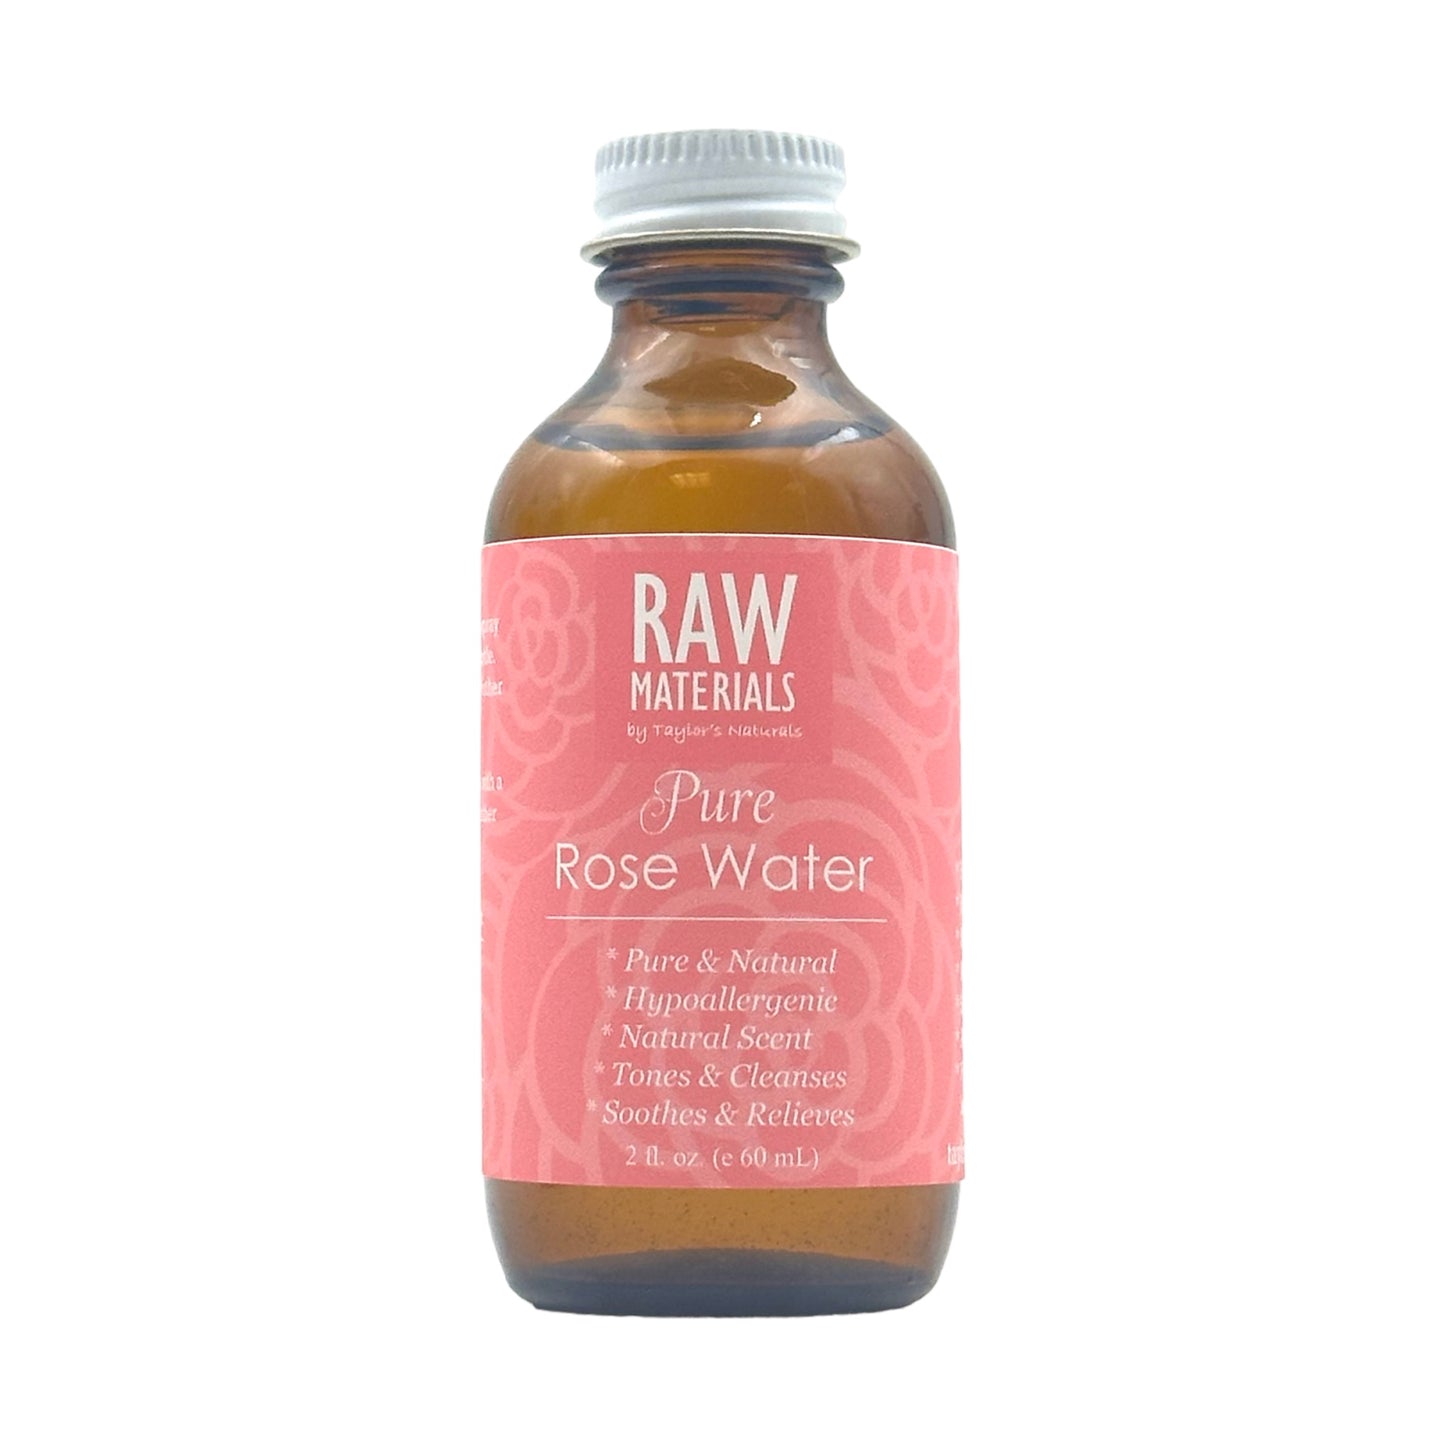 RAW Materials - ORGANIC Rose Water - 100% Pure - Toning Soothing Cleansing (2oz, 4oz, 8oz, or 16oz)